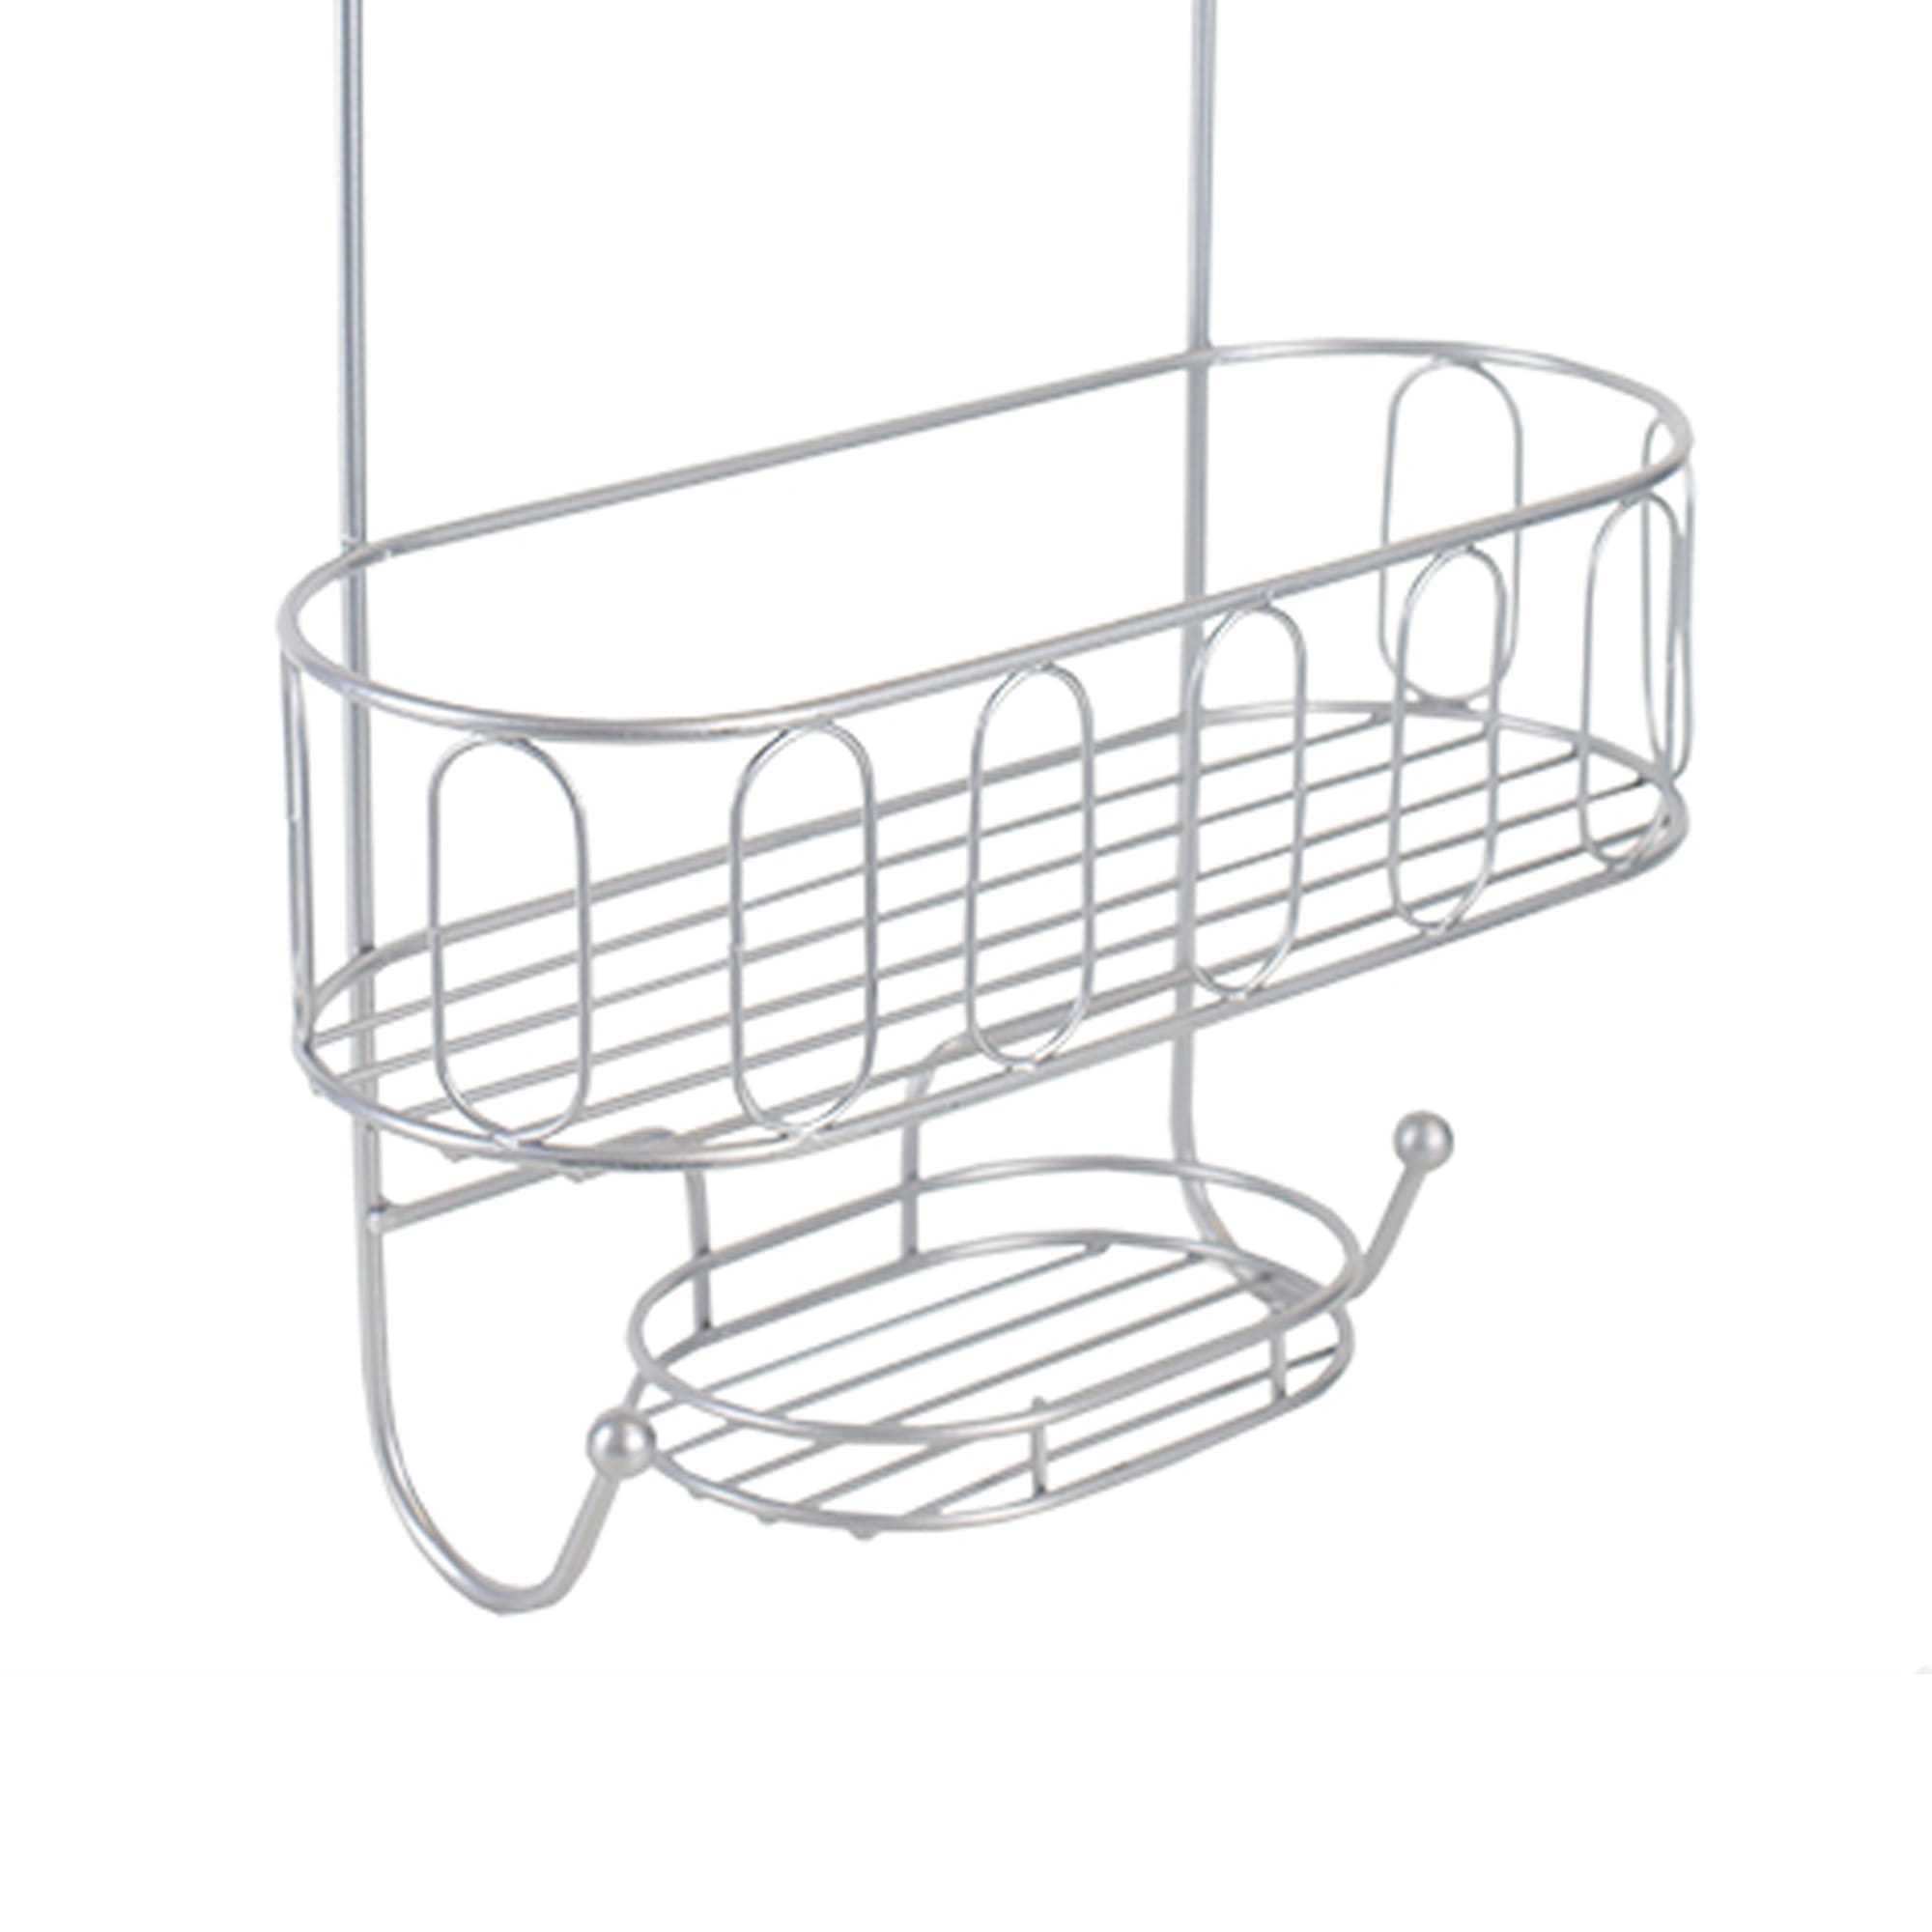 Home Basics Unity 2 Tier Shower Caddy with Bottom Hooks and Center Soap Dish Tray $15.00 EACH, CASE PACK OF 12